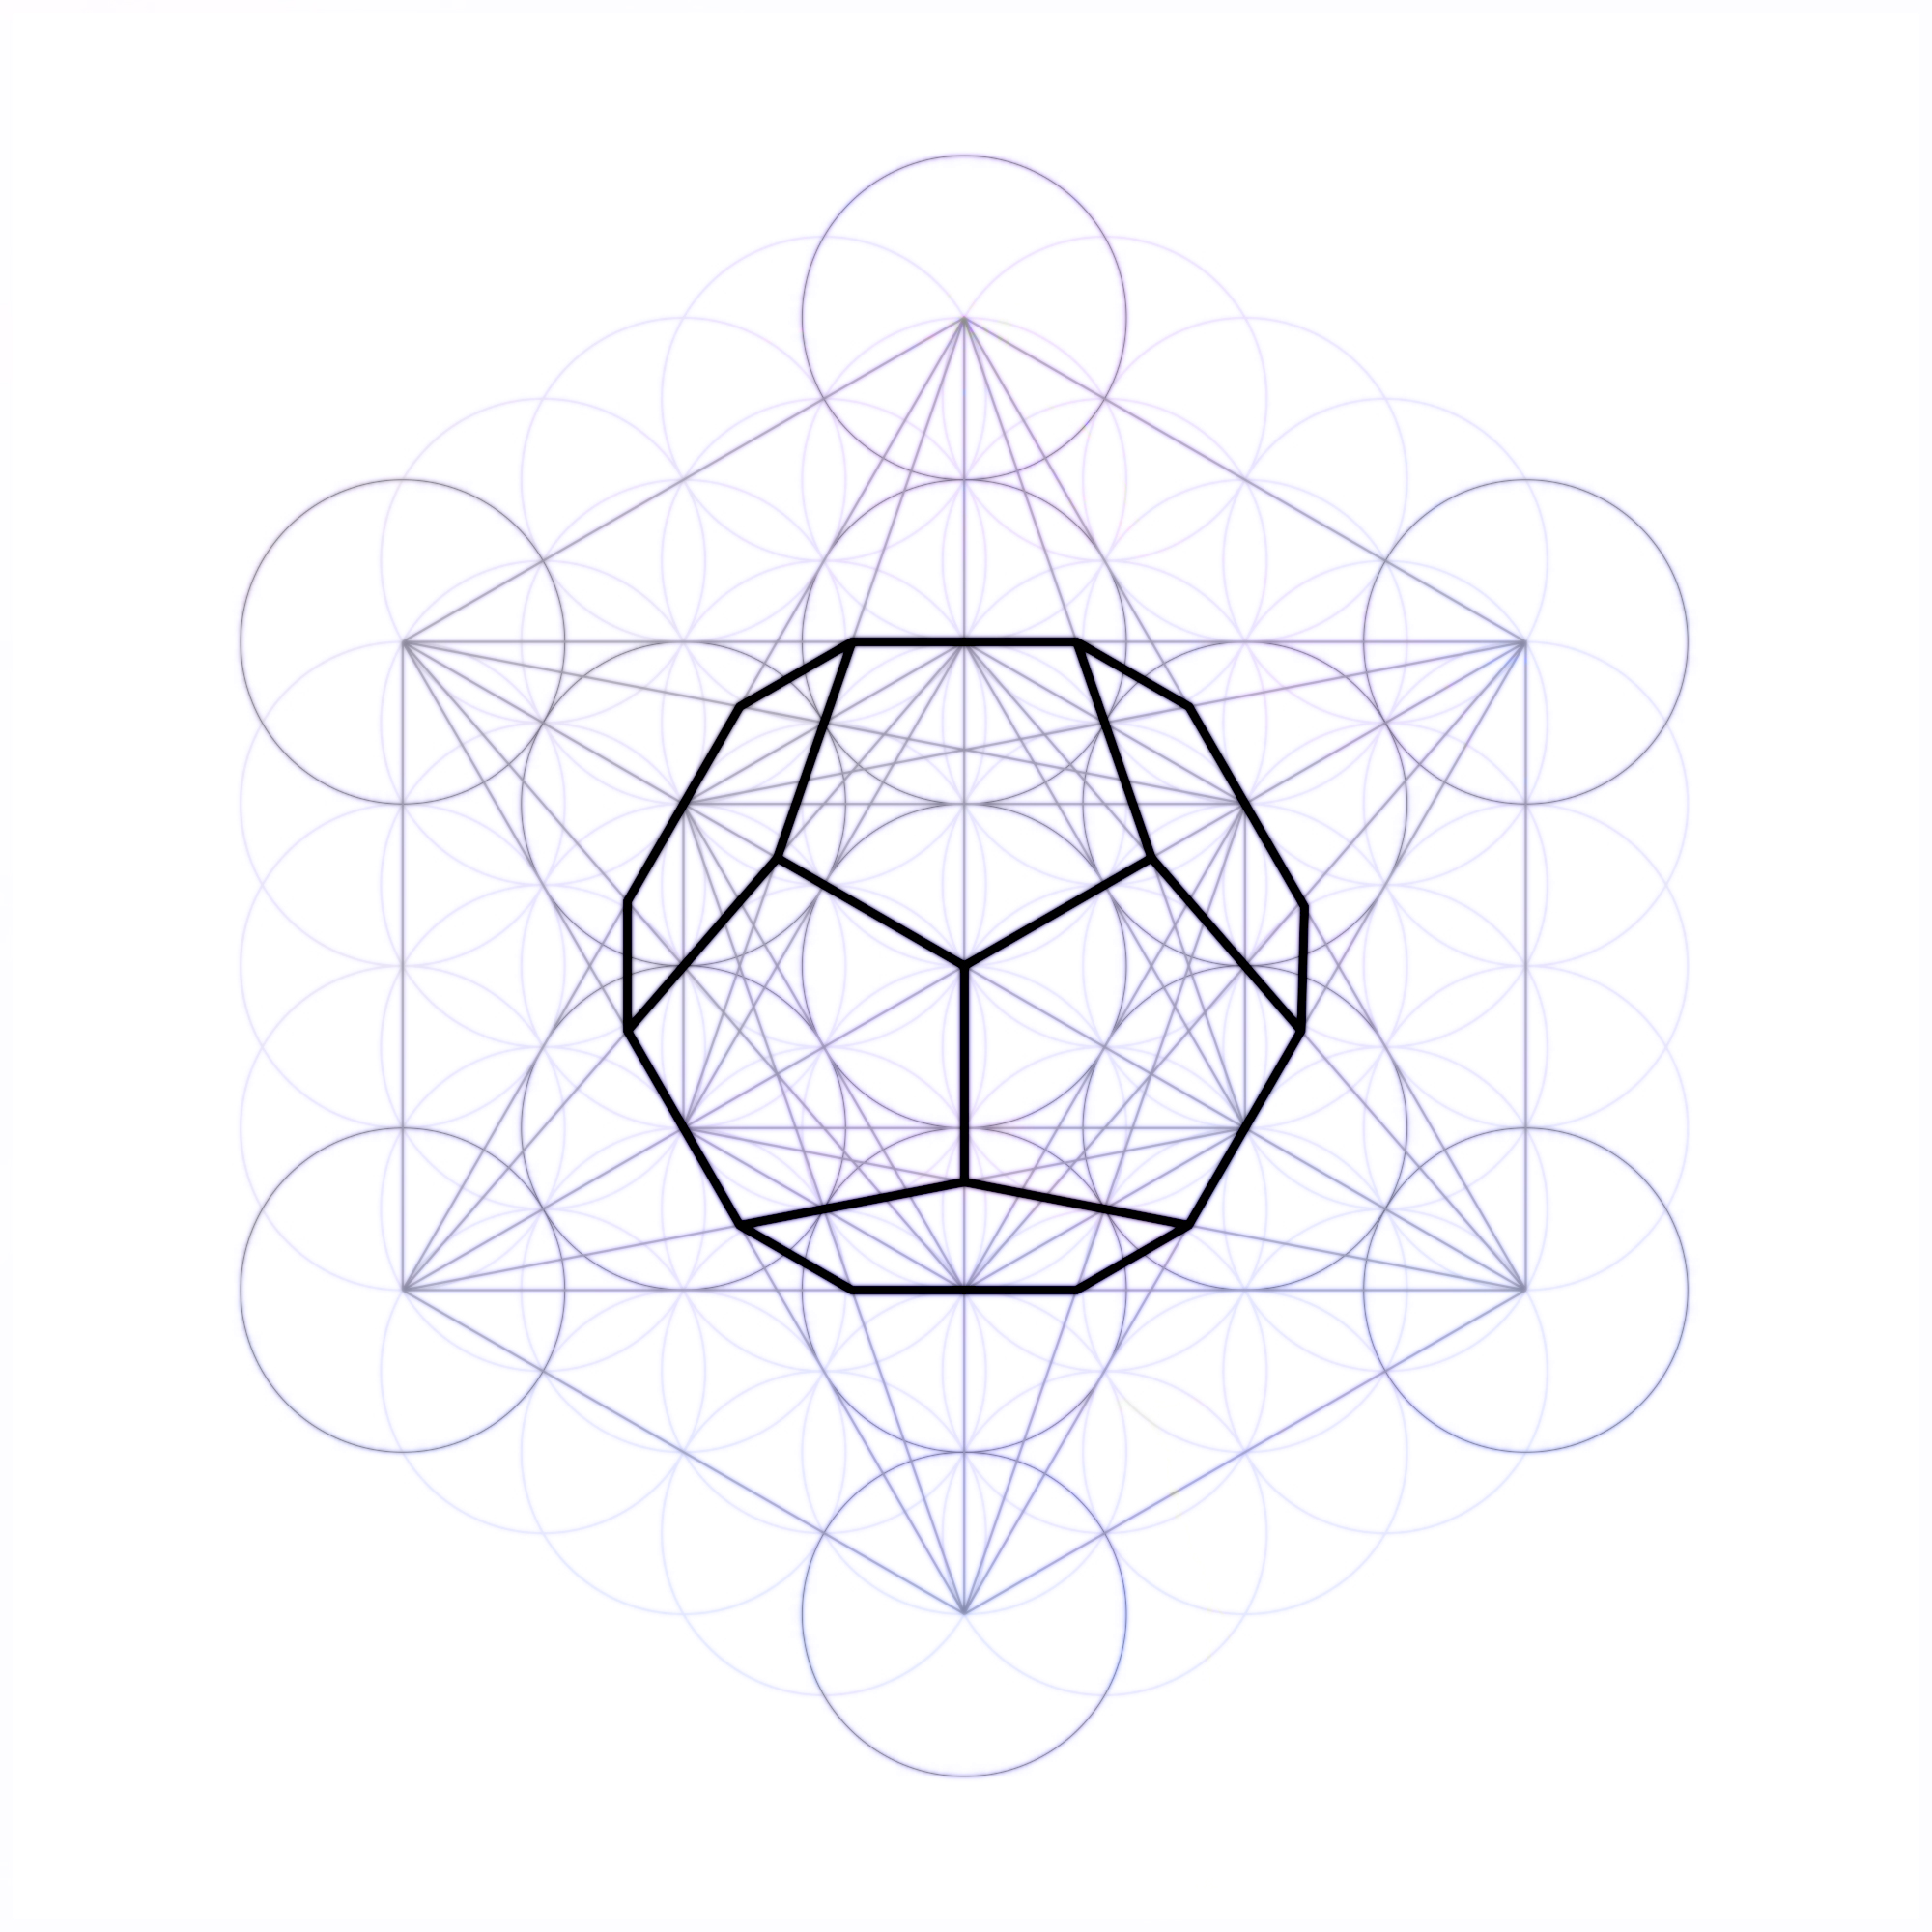 metatrons_dodecahedron_storm